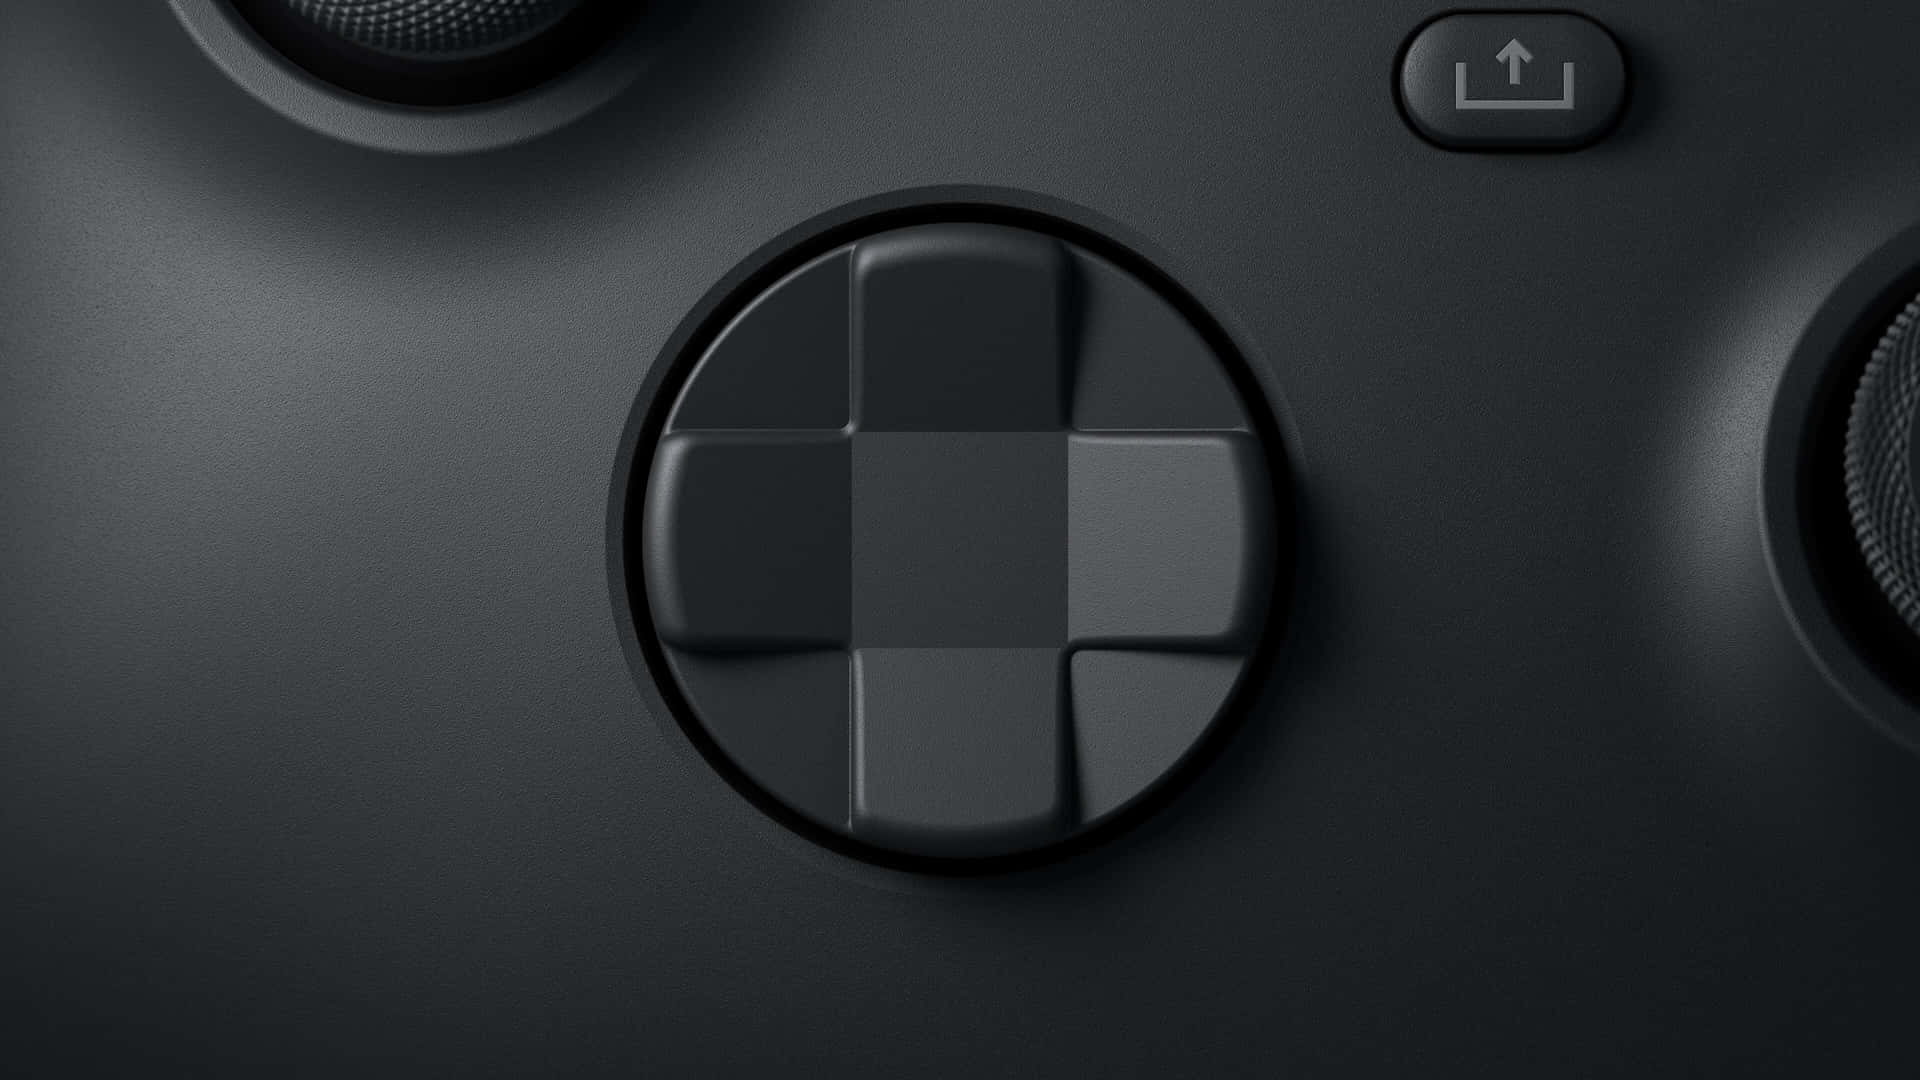 D-pad Of A Remote Game Controller Wallpaper